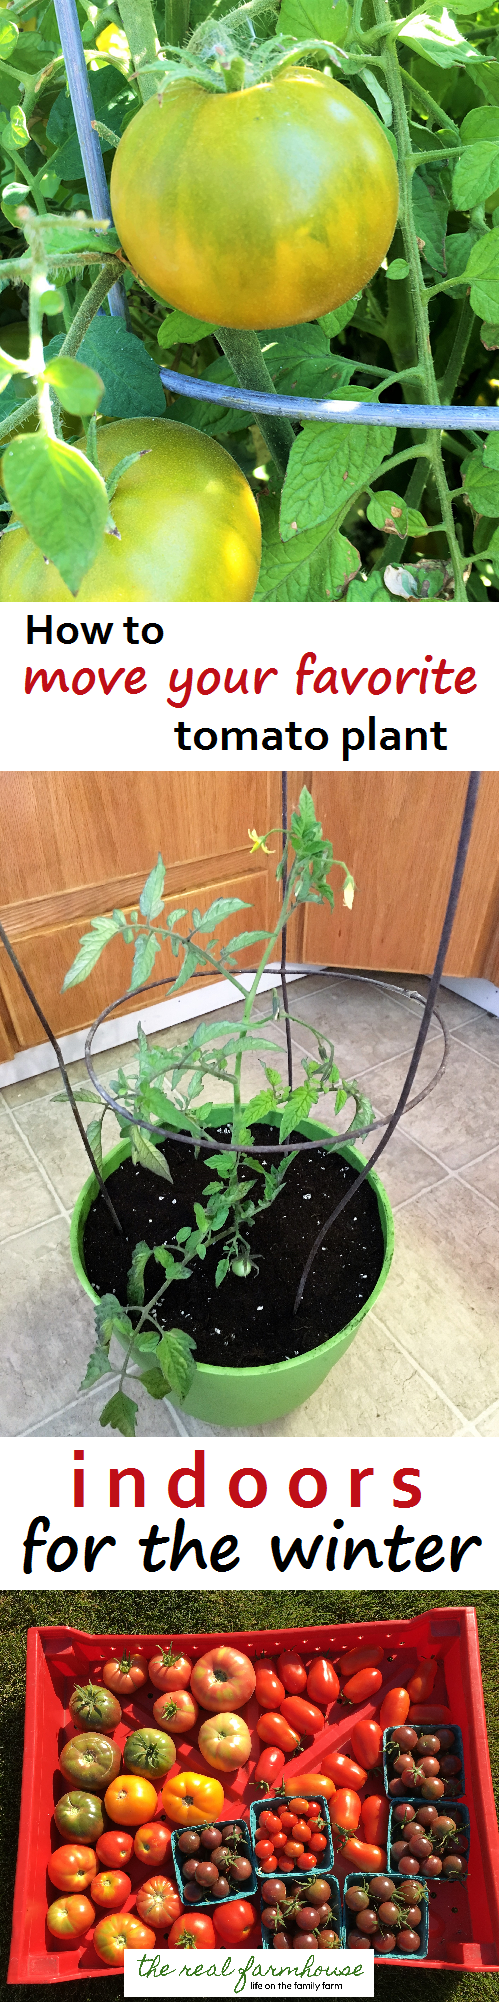 fresh tomatoes through the winter too! How to move your favorite tomato plant indoors safely